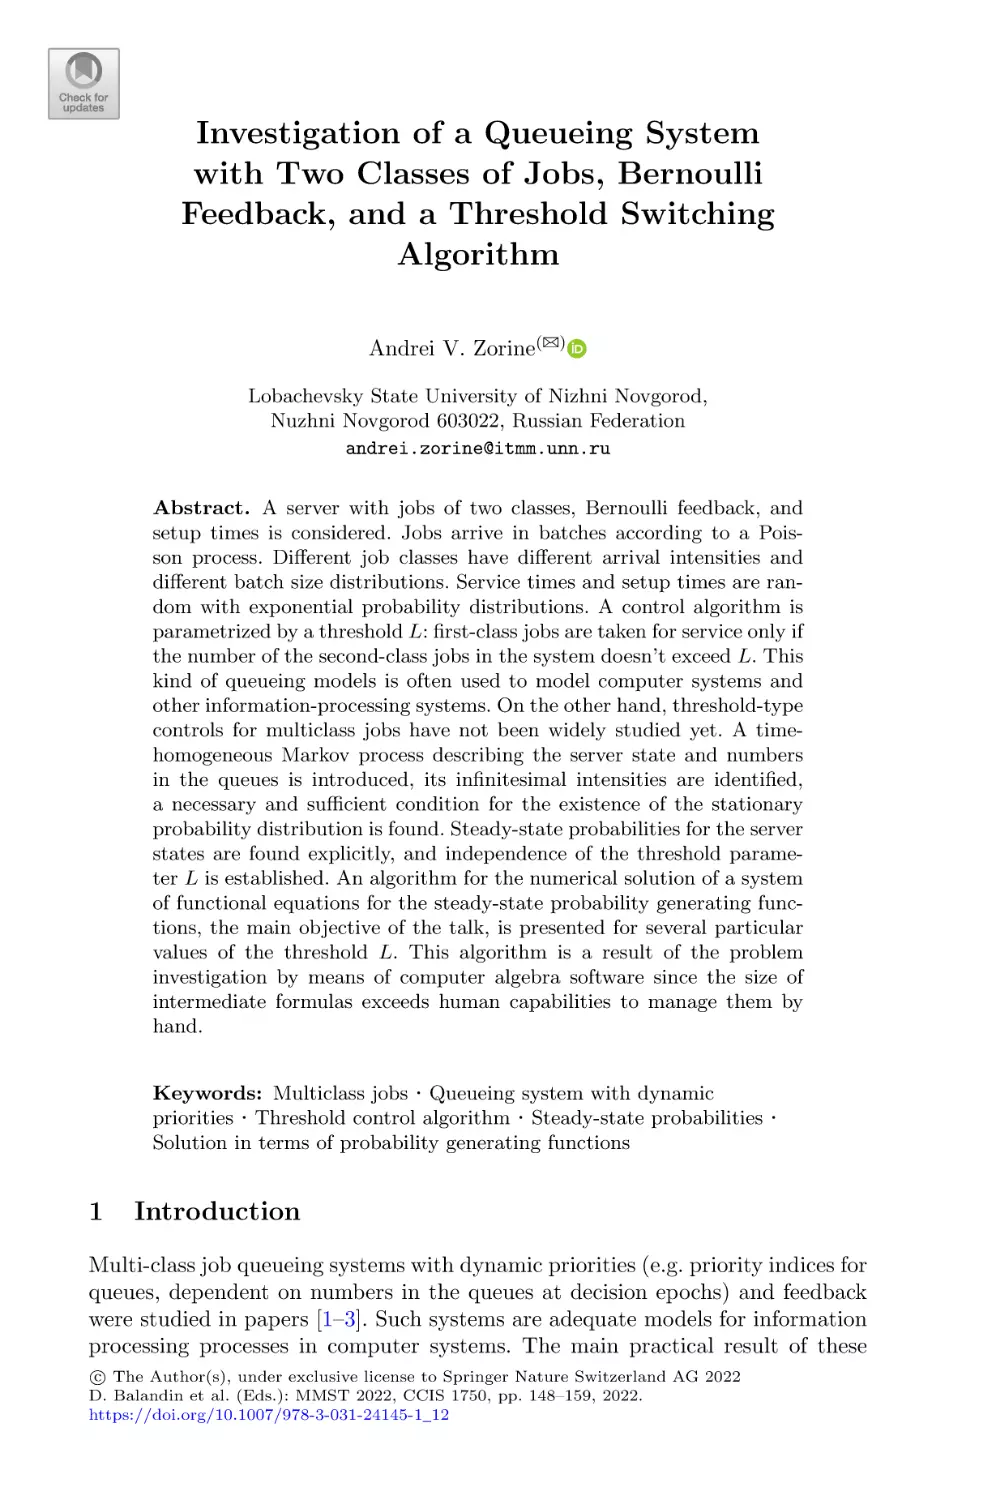 Investigation of a Queueing System with Two Classes of Jobs, Bernoulli Feedback, and a Threshold Switching Algorithm
1 Introduction